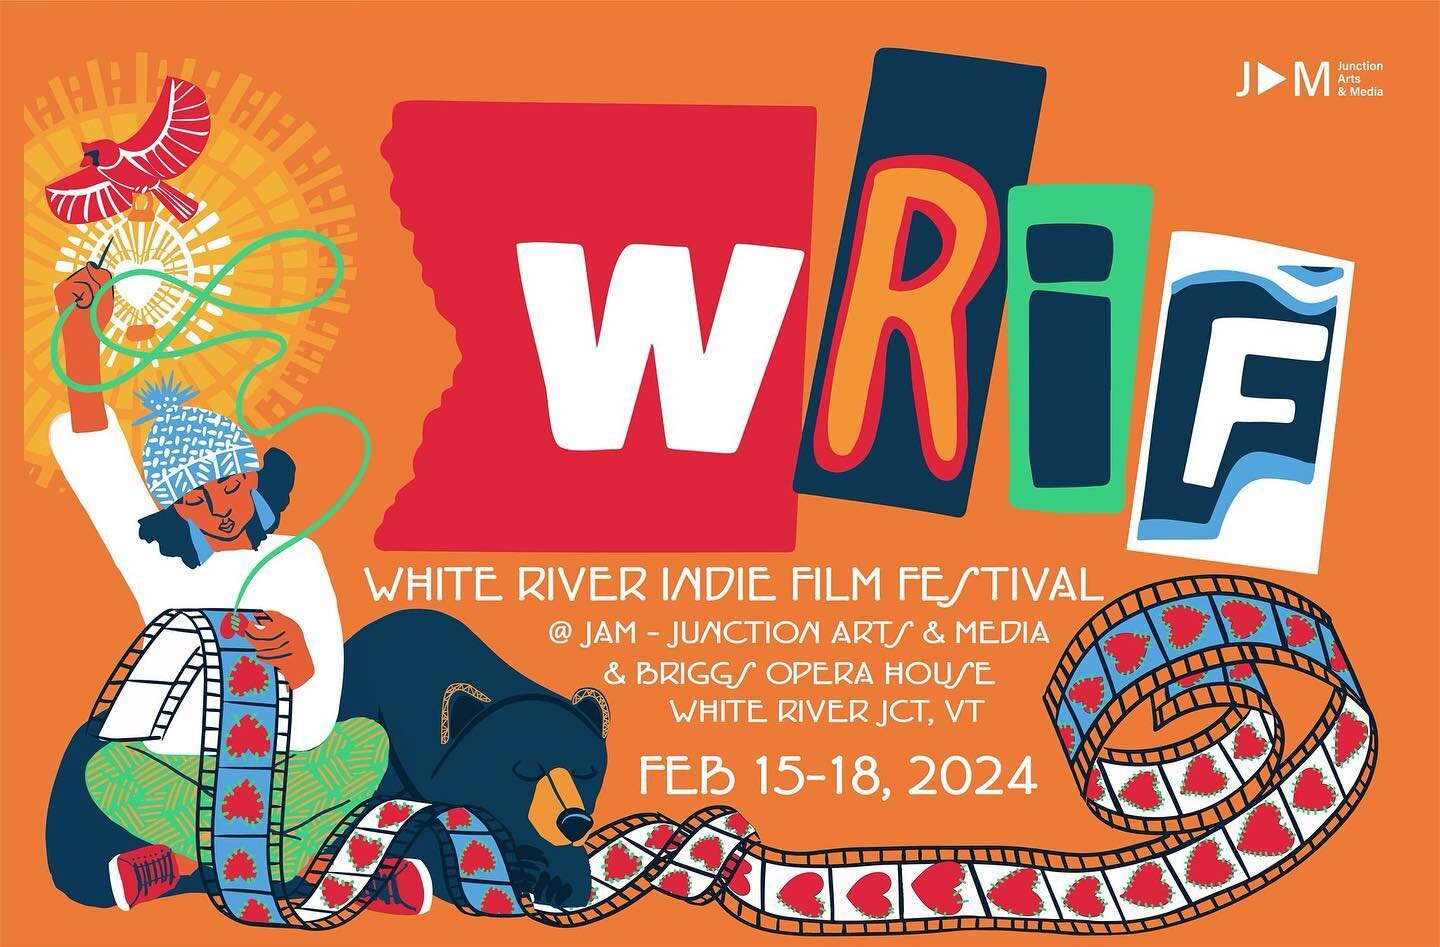 We&rsquo;re headed to the home state of our editor @welltoldfilms next month for the White River Indie Film Festival, in White River Junction, Vermont! Tickets for our screening on Saturday, February 17th and more info at https://uvjam.org/wrif-2024/